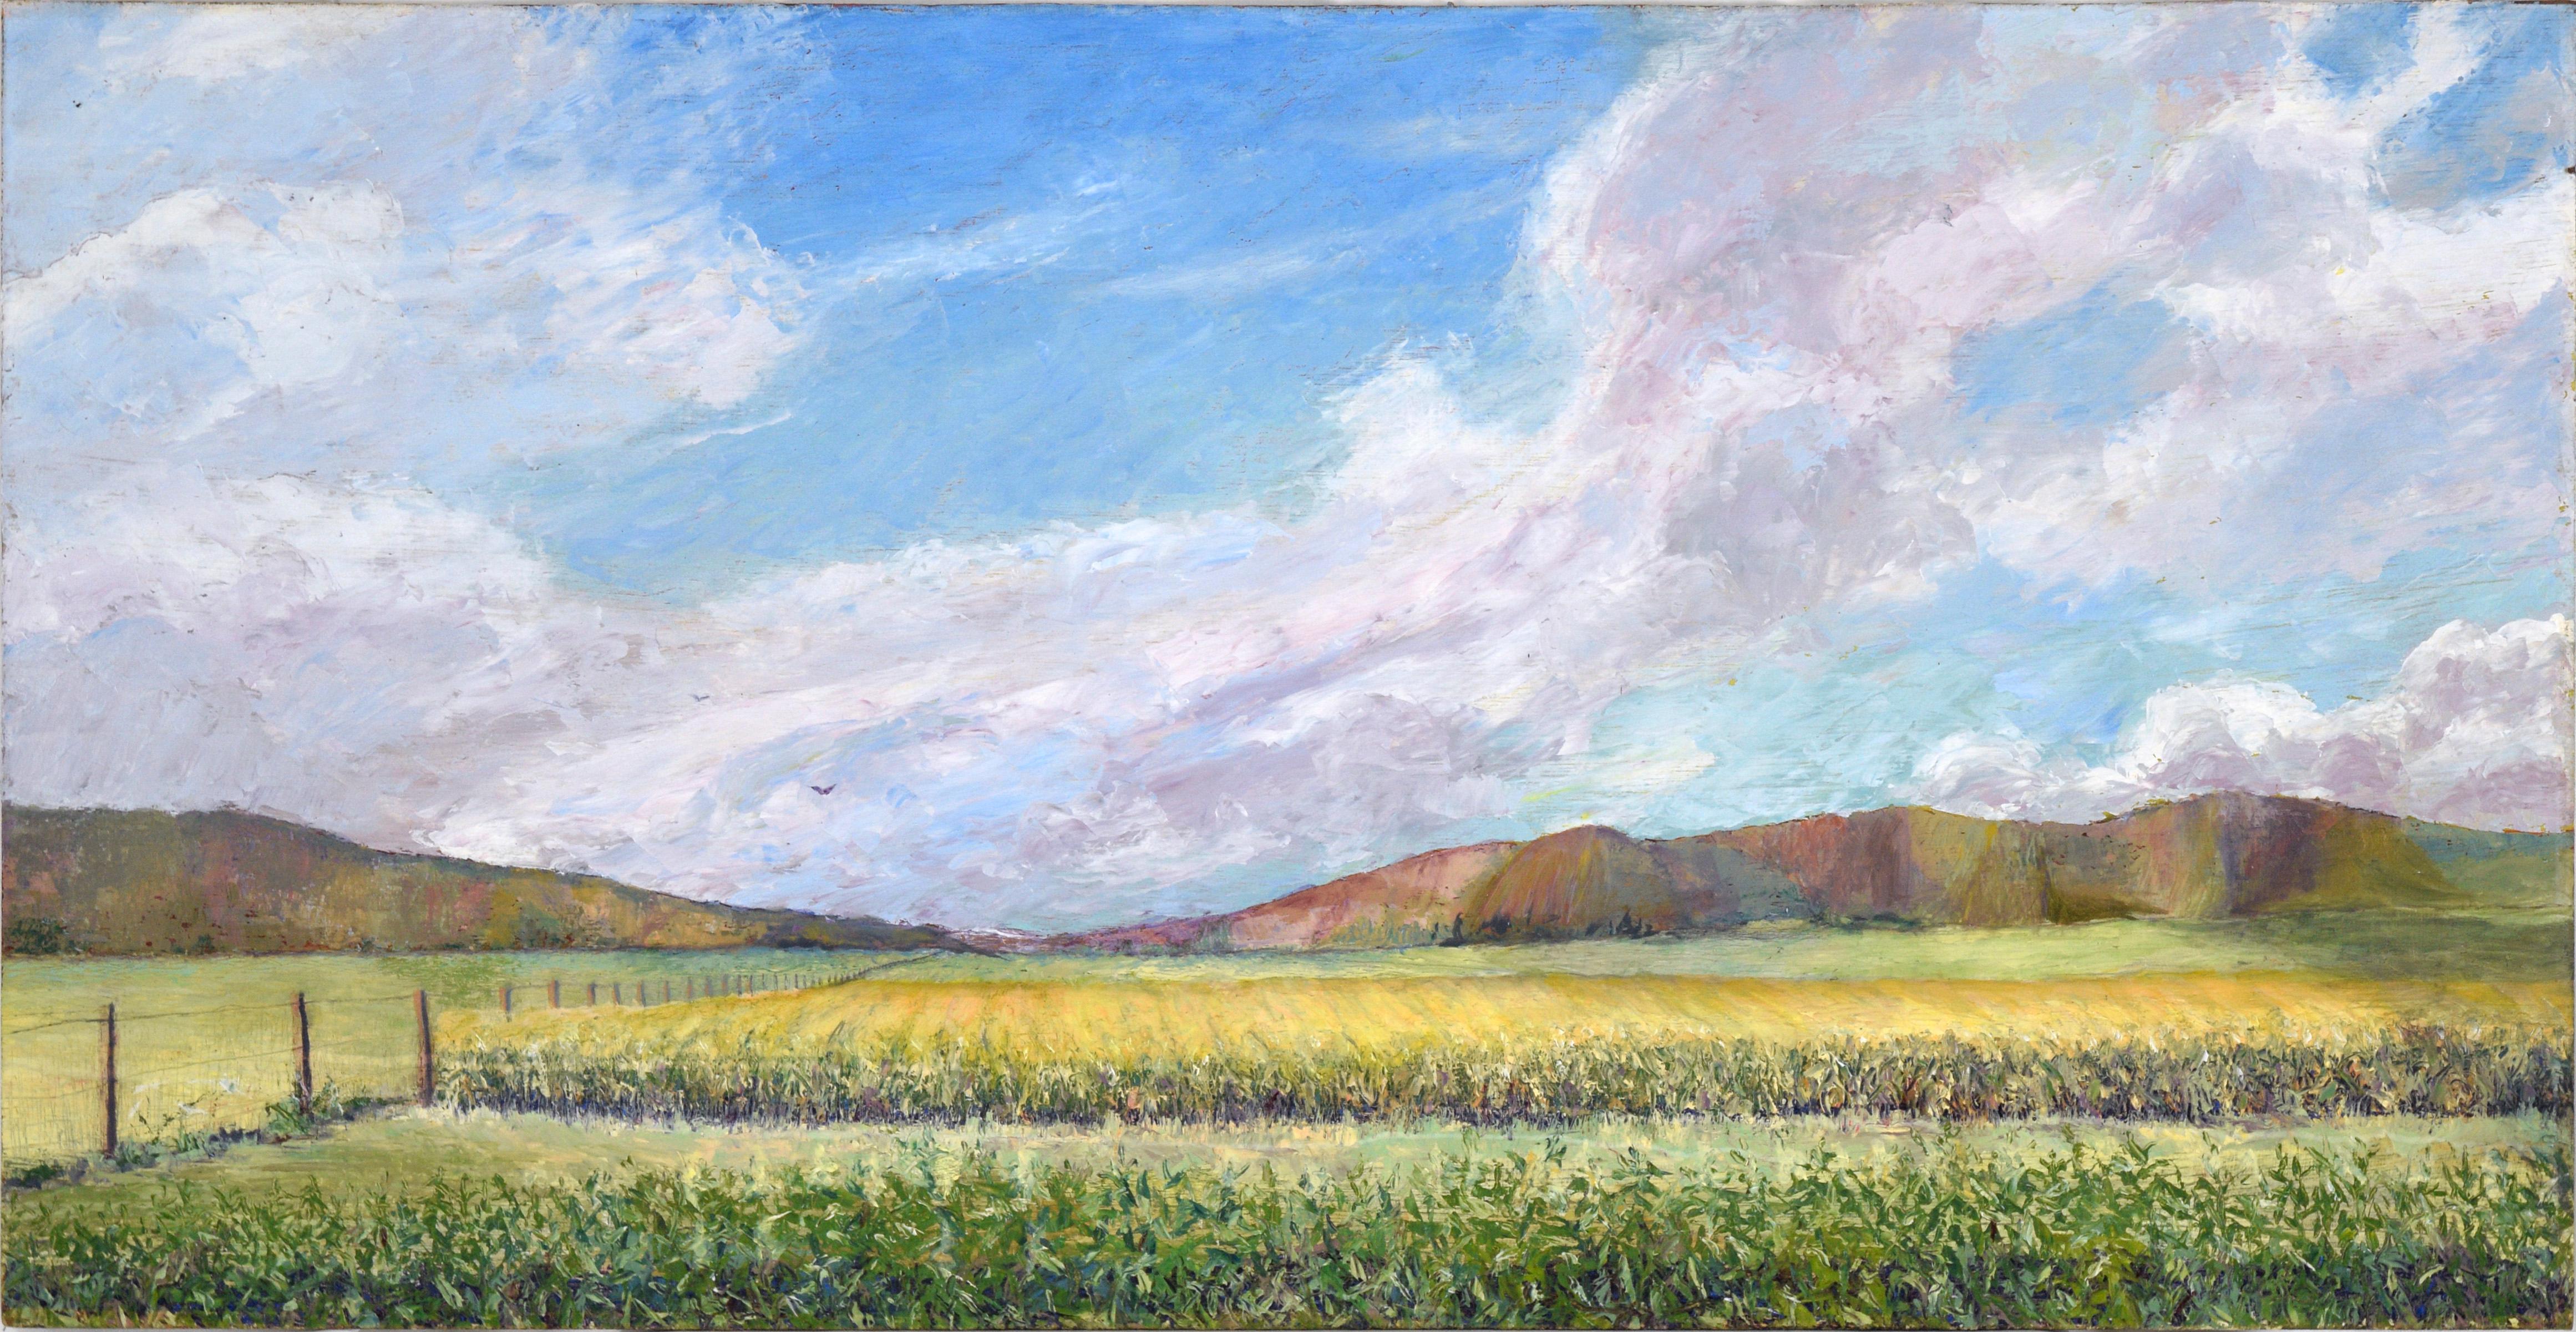 Unknown Landscape Painting - Purple Clouds Above Cornfields on the Farm - Landscape in Oil on Masonite